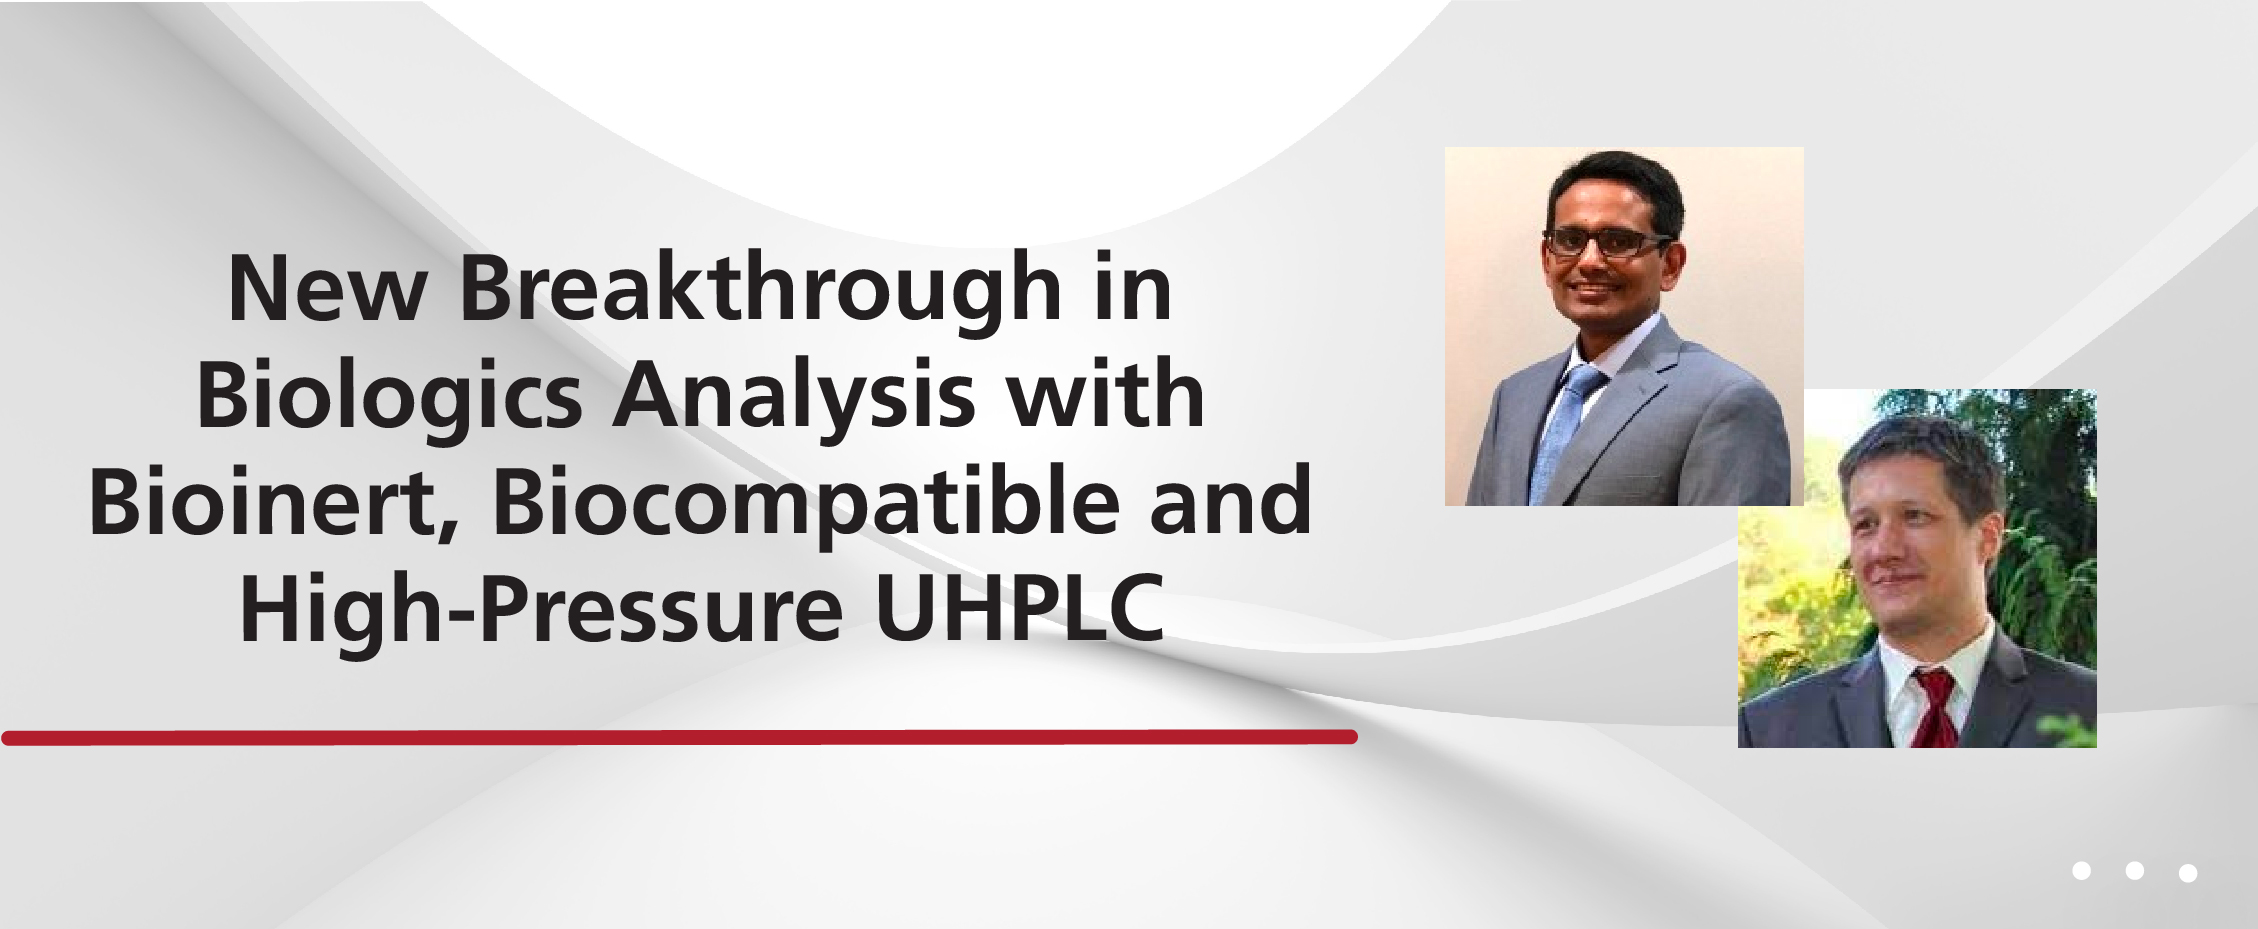 New Breakthrough in Biologics Analysis with Bioinert, Biocompatible and High-Pressure UHPLC